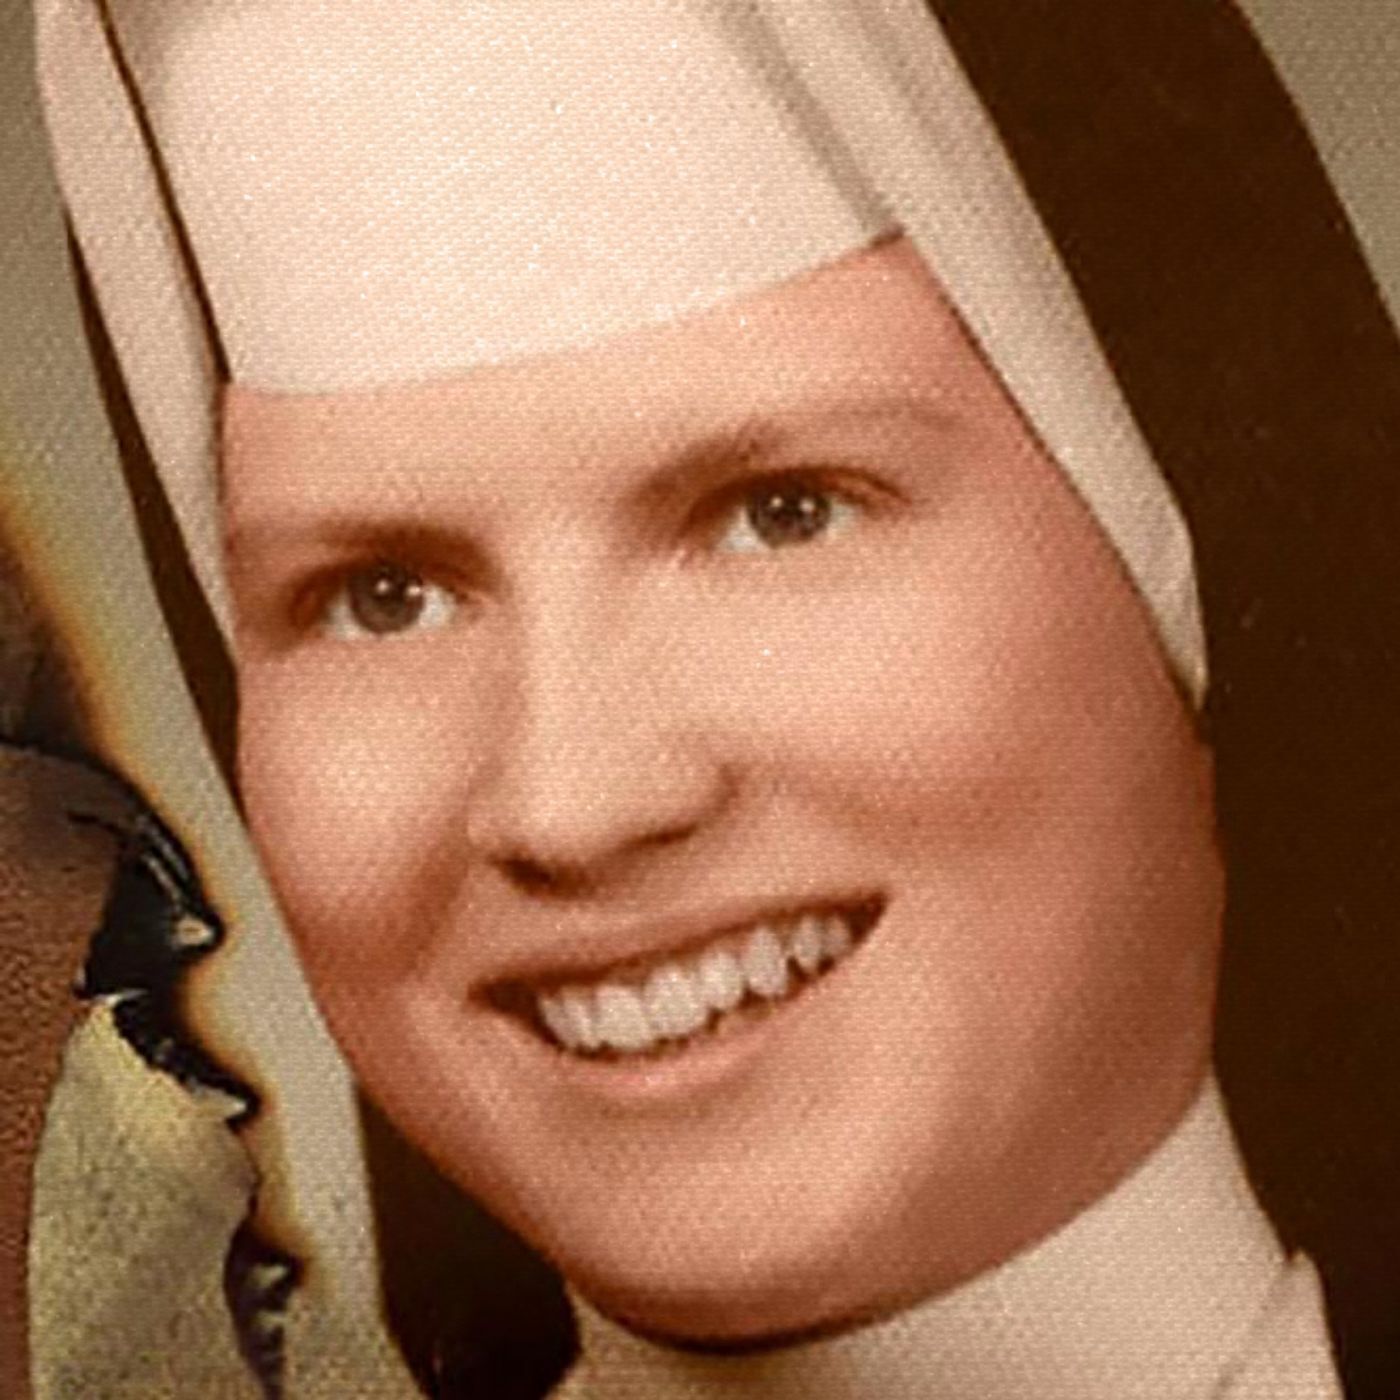 S2 Ep79: Unsolved Murder of Sister Cathy [The Brother] Image